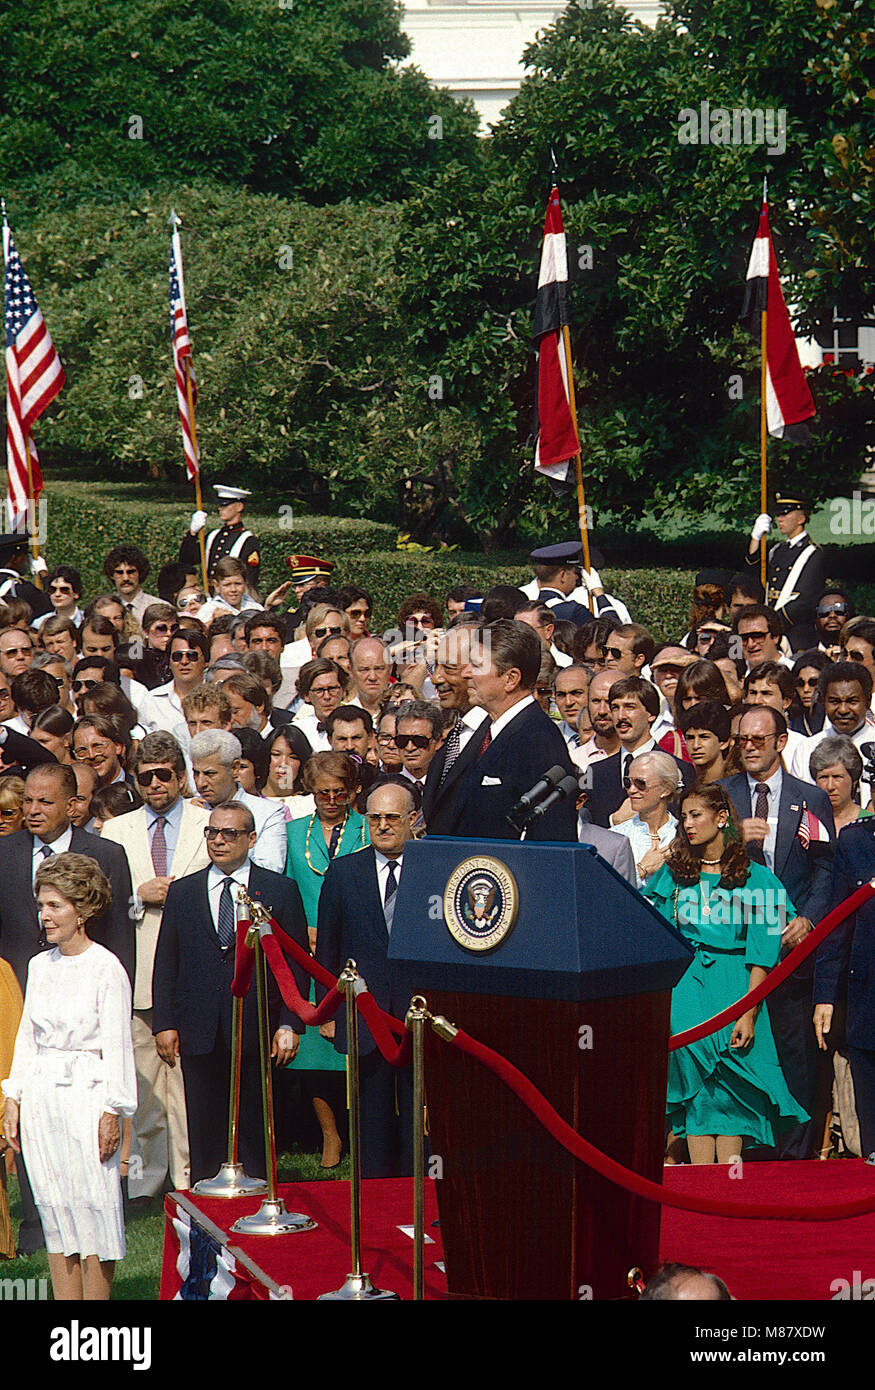 Washington, DC., USA, August 5, 1981  President Ronald Reagan and Egyptian President Anwar  el-Sadat during the official welcoming ceremony on the South Lawn. Credit: Mark Reinstein/MediaPunch Stock Photo